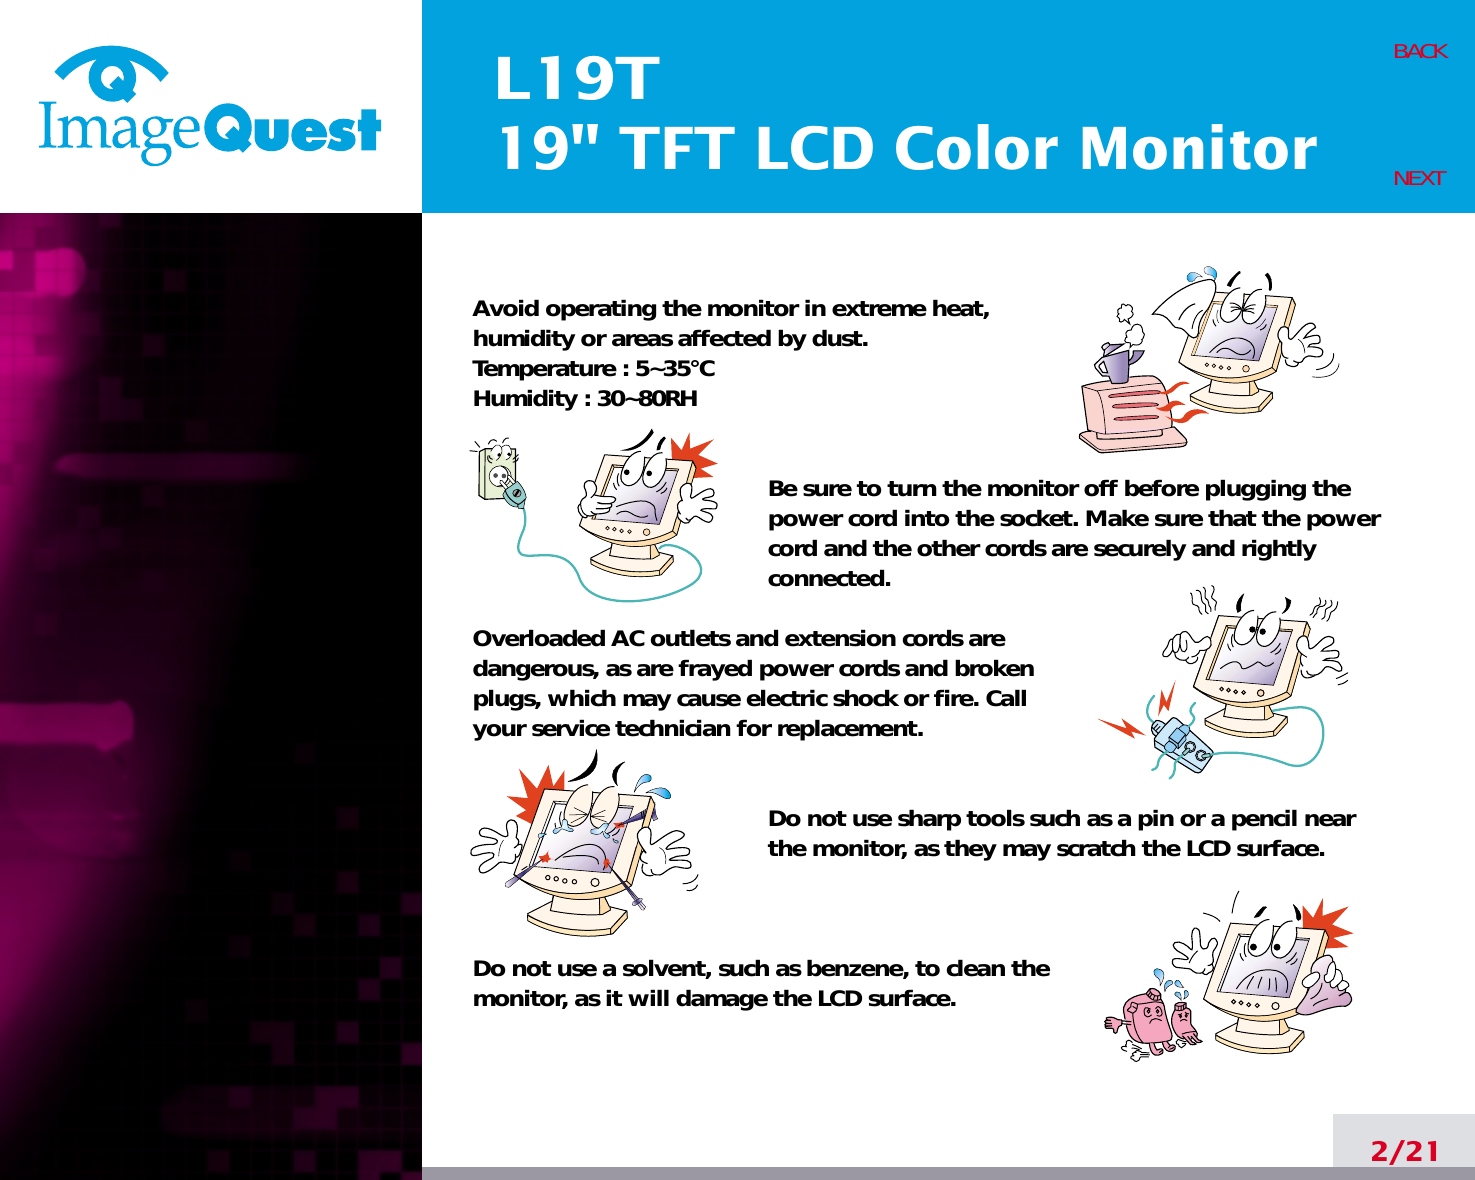 L19T19&quot; TFT LCD Color Monitor2/21BACKNEXTAvoid operating the monitor in extreme heat, humidity or areas affected by dust. Temperature : 5~35°CHumidity : 30~80RH Be sure to turn the monitor off before plugging thepower cord into the socket. Make sure that the powercord and the other cords are securely and rightlyconnected.Overloaded AC outlets and extension cords are dangerous, as are frayed power cords and broken plugs, which may cause electric shock or fire. Call your service technician for replacement.Do not use sharp tools such as a pin or a pencil near the monitor, as they may scratch the LCD surface.Do not use a solvent, such as benzene, to clean the monitor, as it will damage the LCD surface.